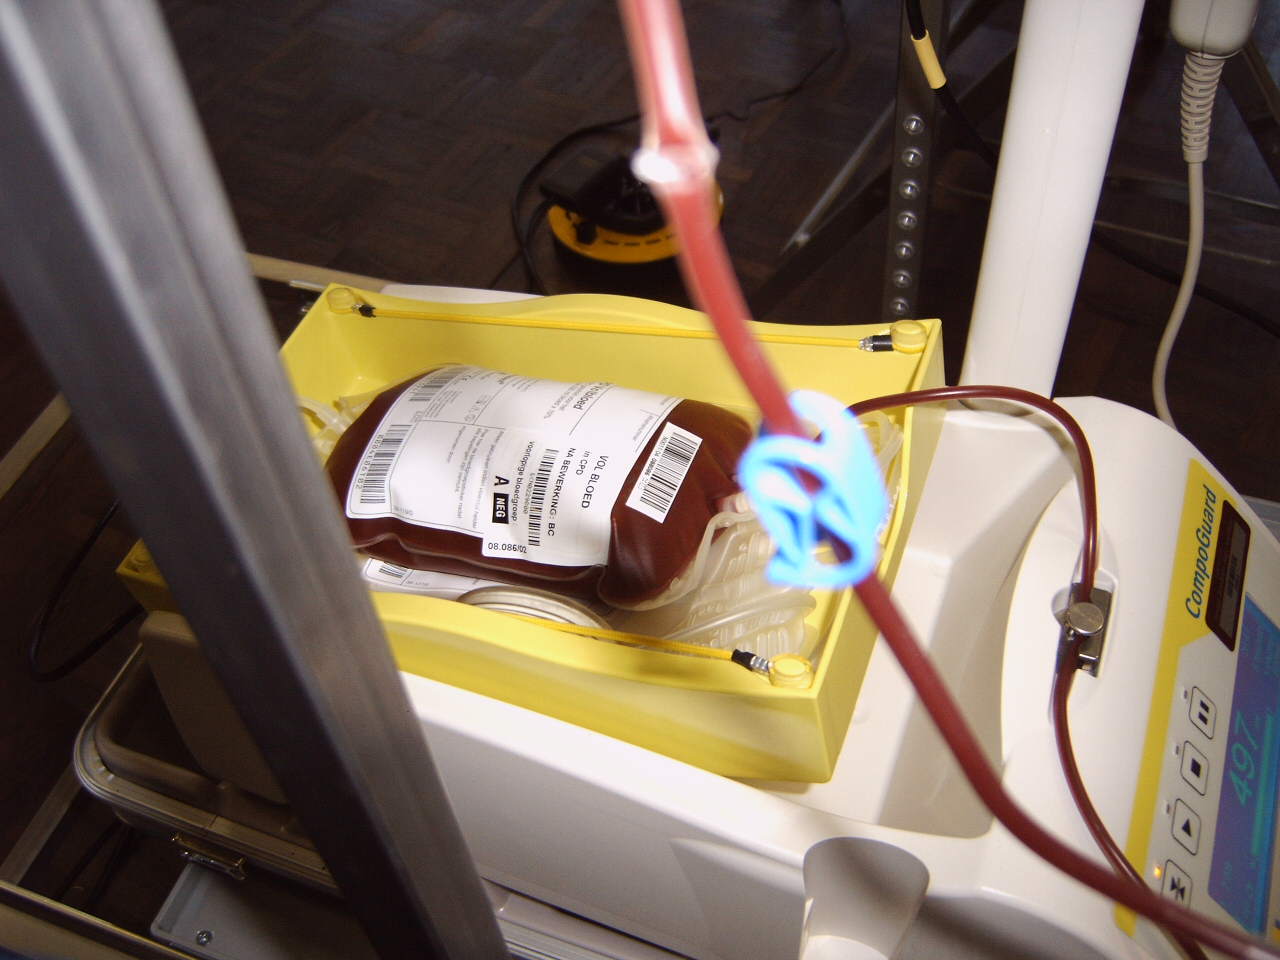 A pint of blood after blood donation. Photo: Wikimedia Commons